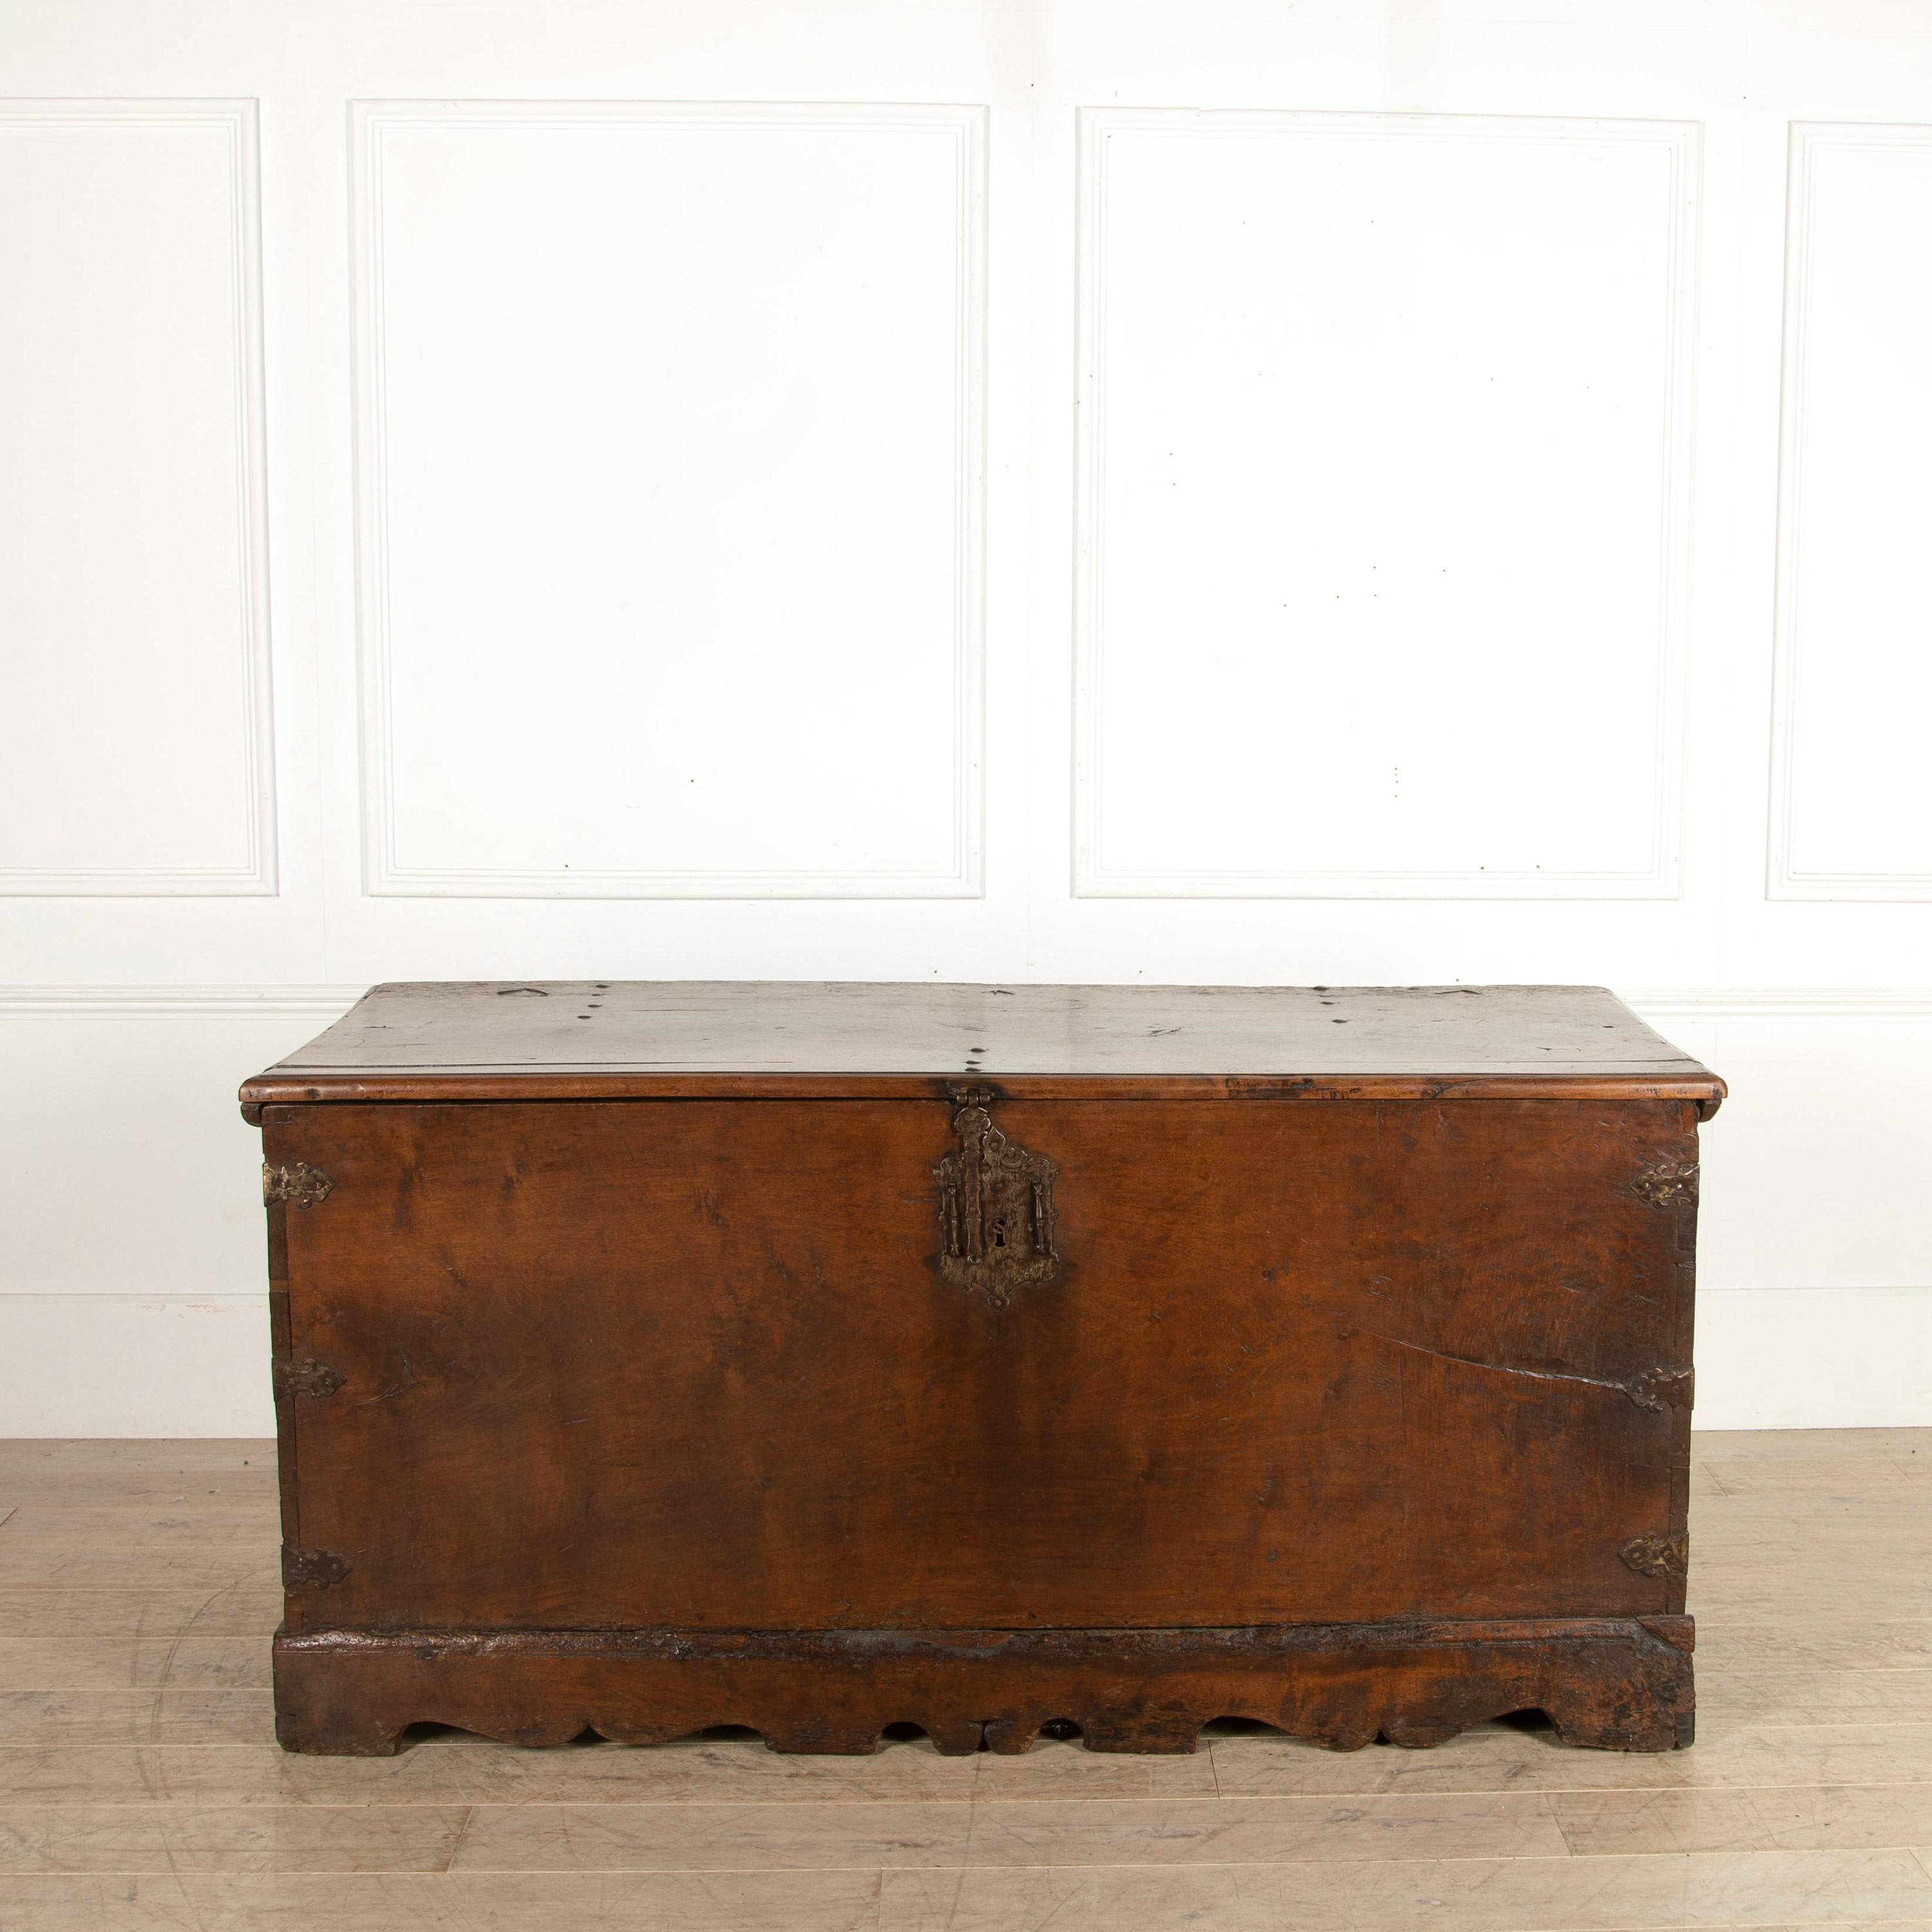 French 17th century solid walnut coffer/chest. Dating from circa 1620, beautiful patina and age to this imposing piece from a French Château, beautifully constructed from solid walnut with a huge piece of single plank walnut to the front. Handsome